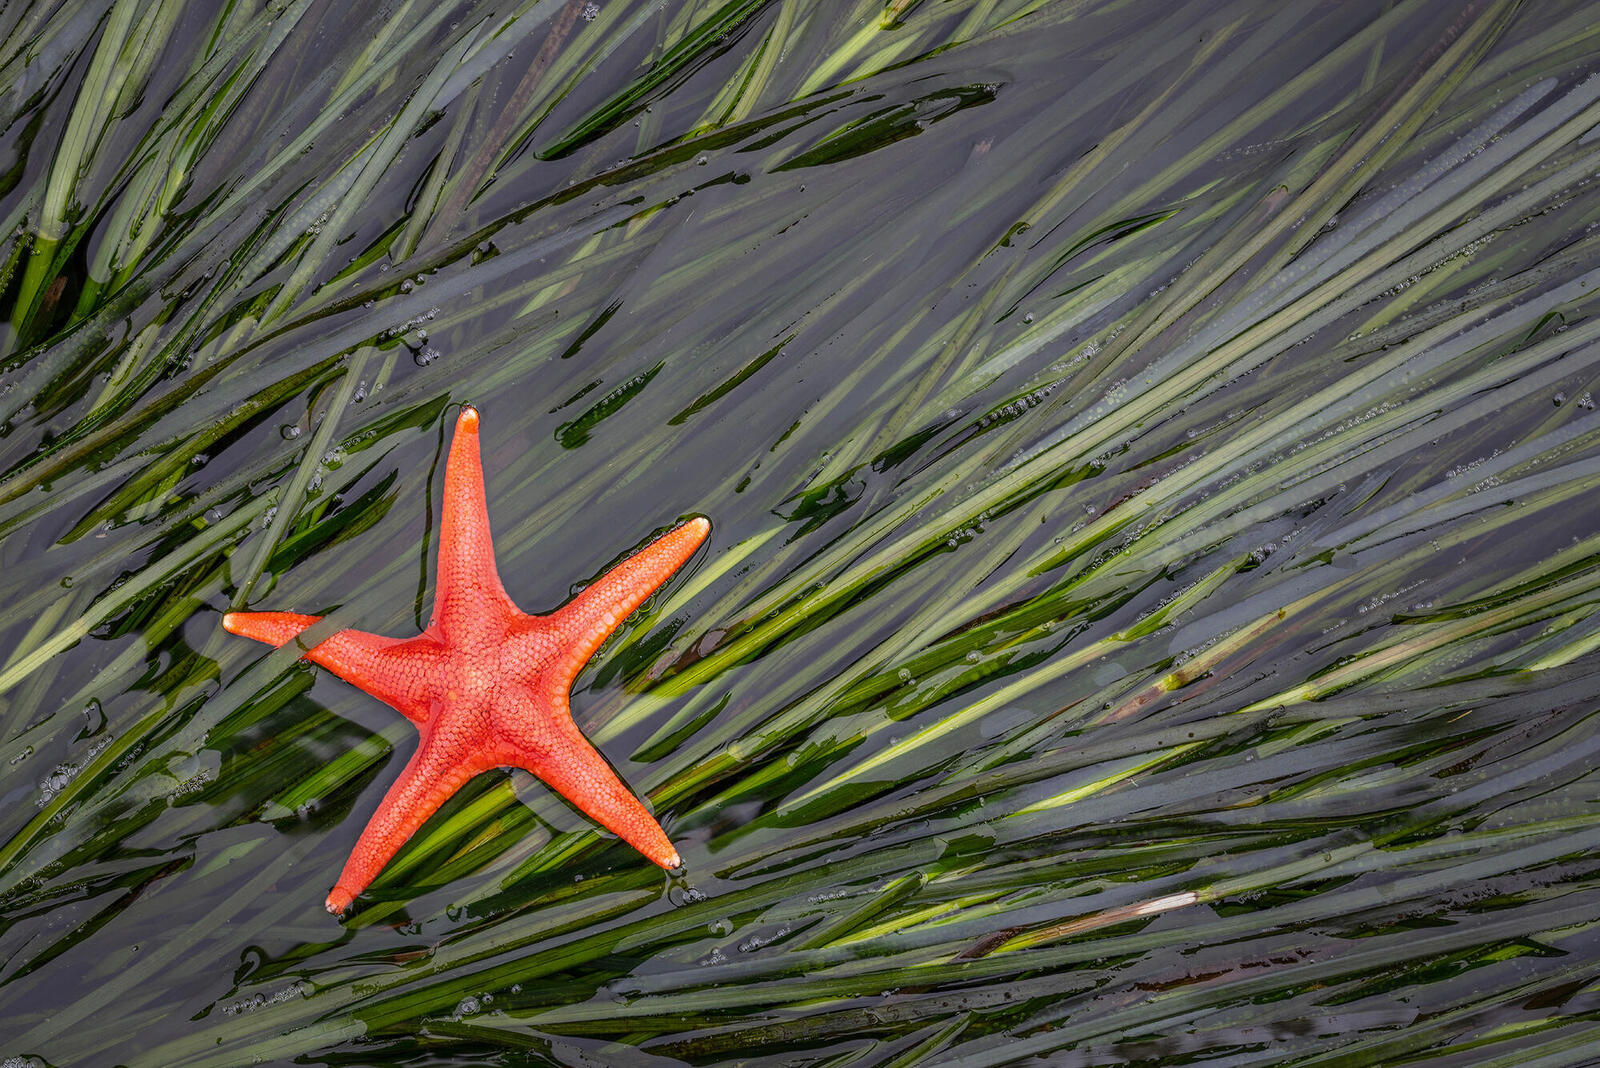 A red sea star on green vegetation